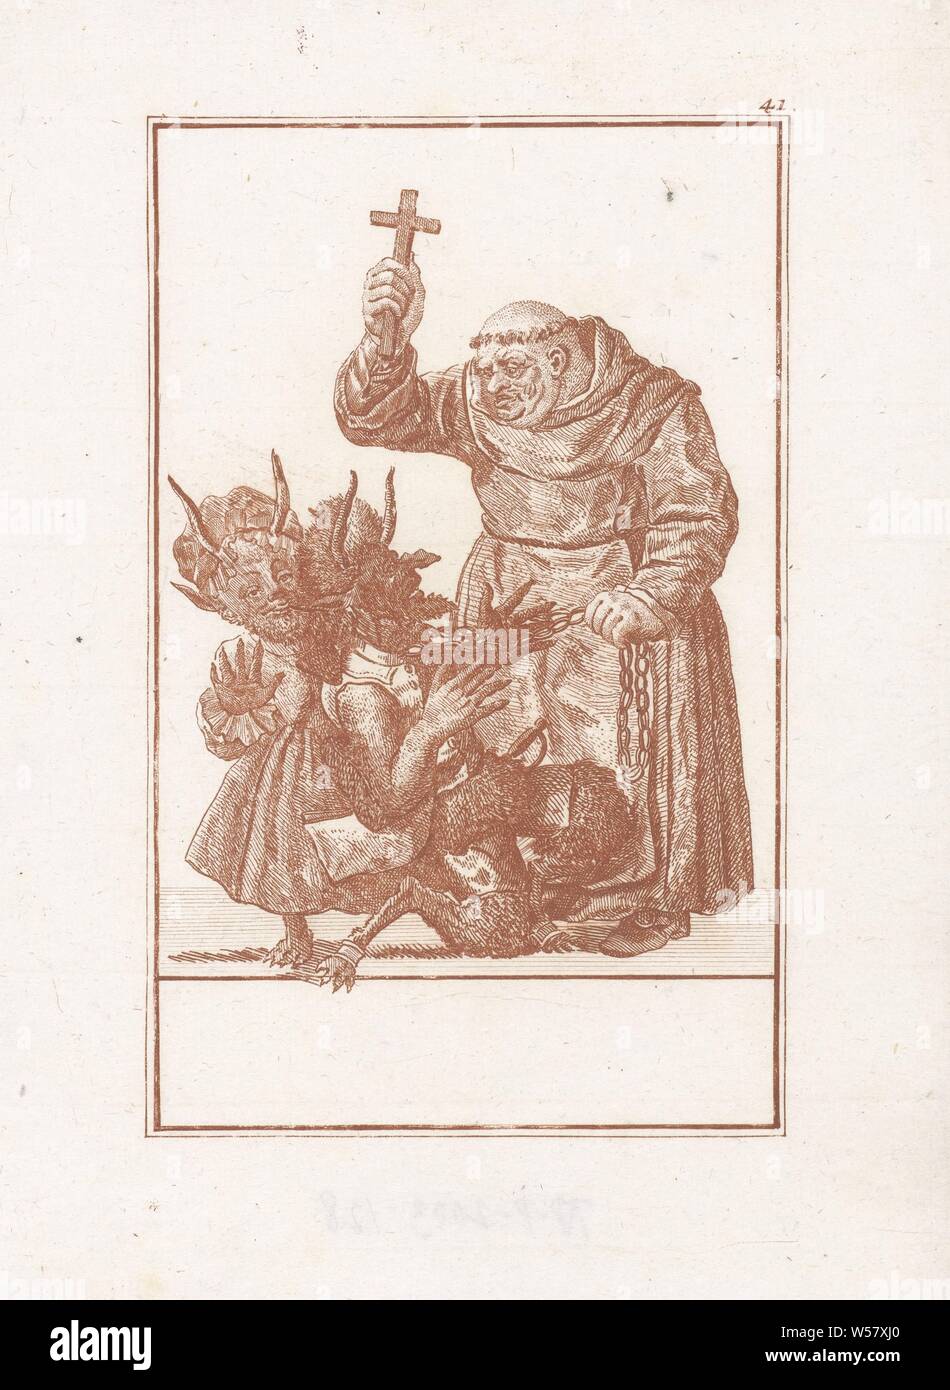 Monk threatens two devils Abuses of the Catholic clergy (series title) L'Abregé du Faux Clerge Romain (series title), A fat monk with a crucifix in his hand. He threatens two diabolical figures at his feet with the cross. He has put one of the devils on a chain. The print is part of a 50-part series on the subject of the abuses of the Catholic clergy., Jacob Gole (attributed to), Amsterdam, 1724, paper, etching, h 232 mm × w 182 mm Stock Photo